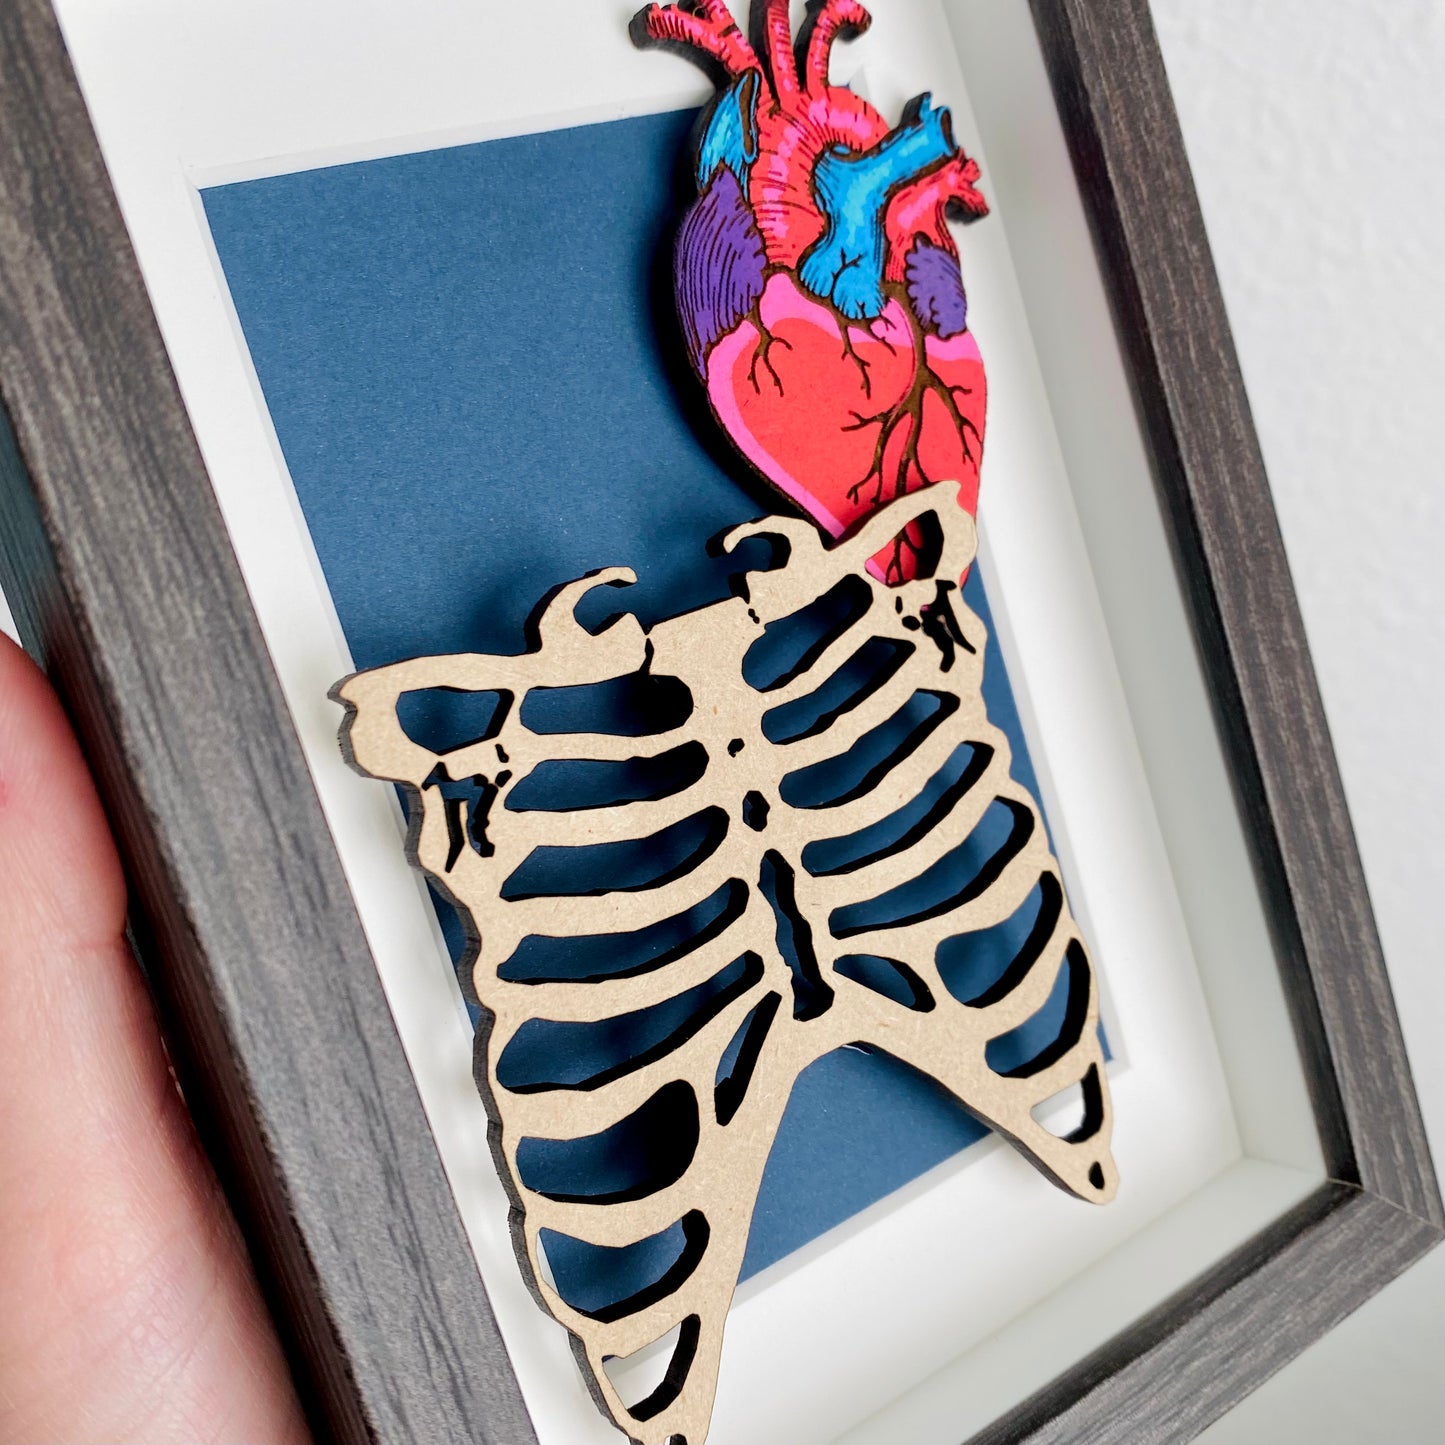 Ribcage + Anatomical Heart Woodcut Framed Painting